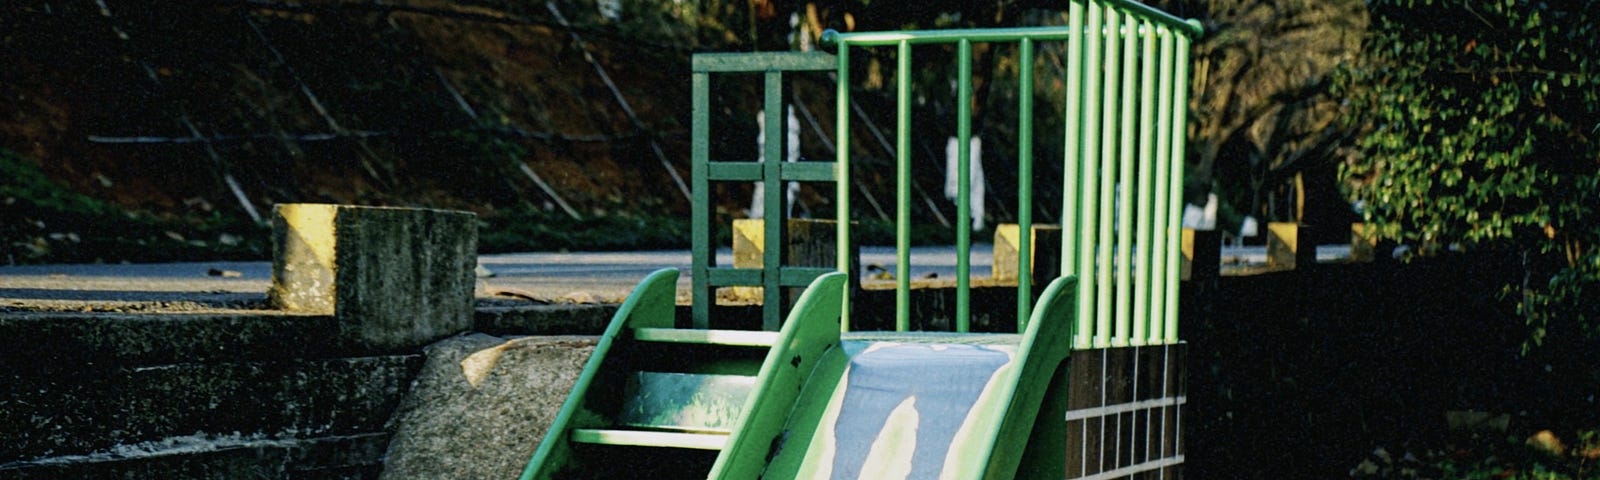 A set of stairs and a metal children’s slide on a playground